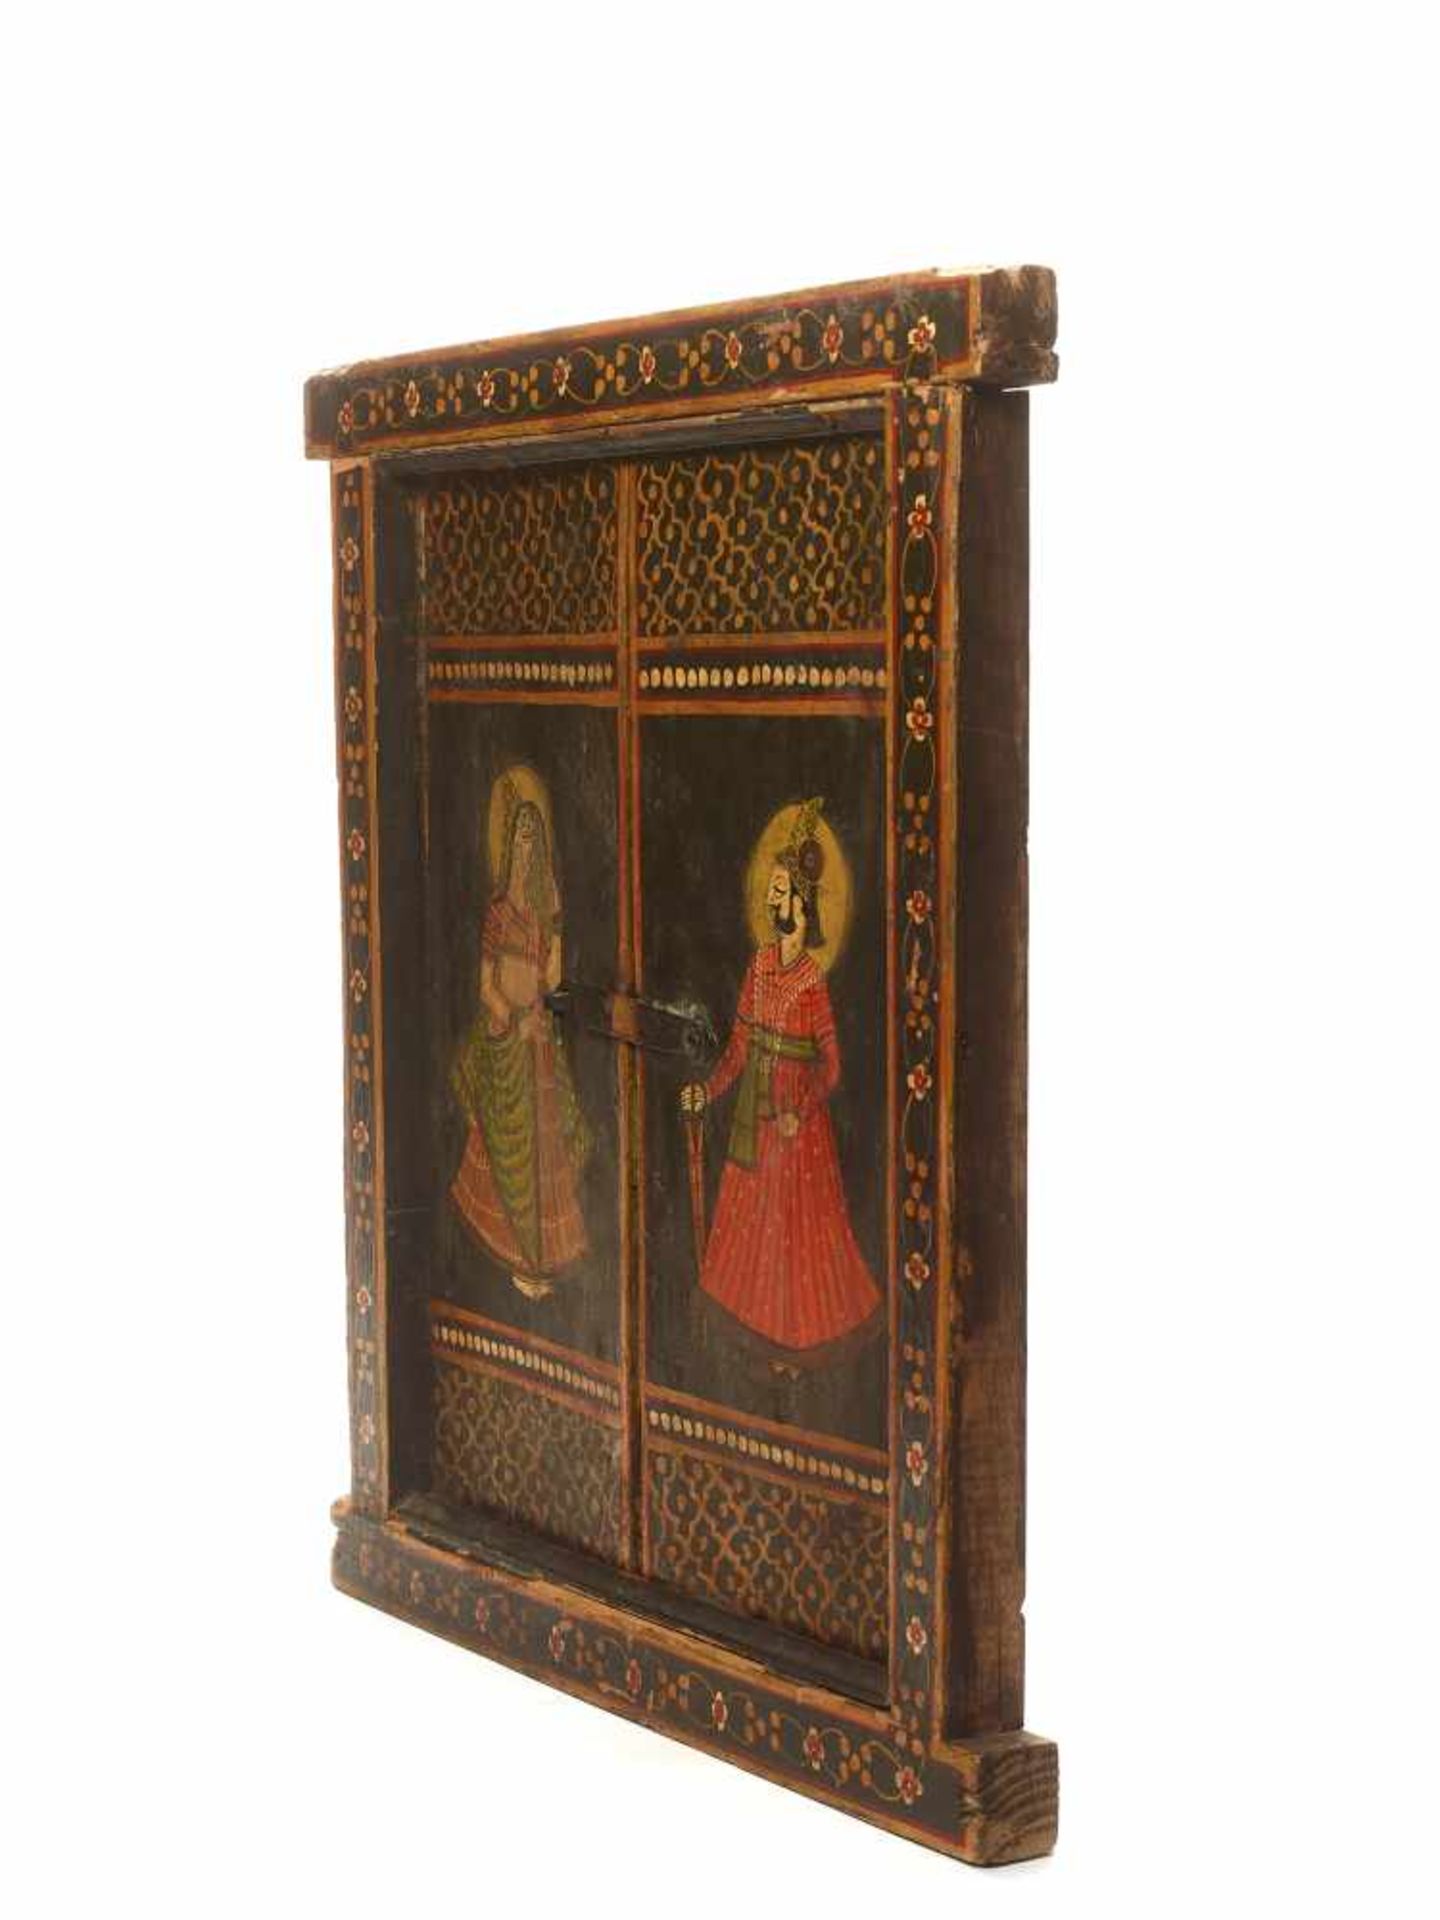 A DOUBLE-FOLDING WOODEN WINDOW - INDIA, 19TH CENTURYIndia, late 19th centuryPainted wood and - Bild 3 aus 4